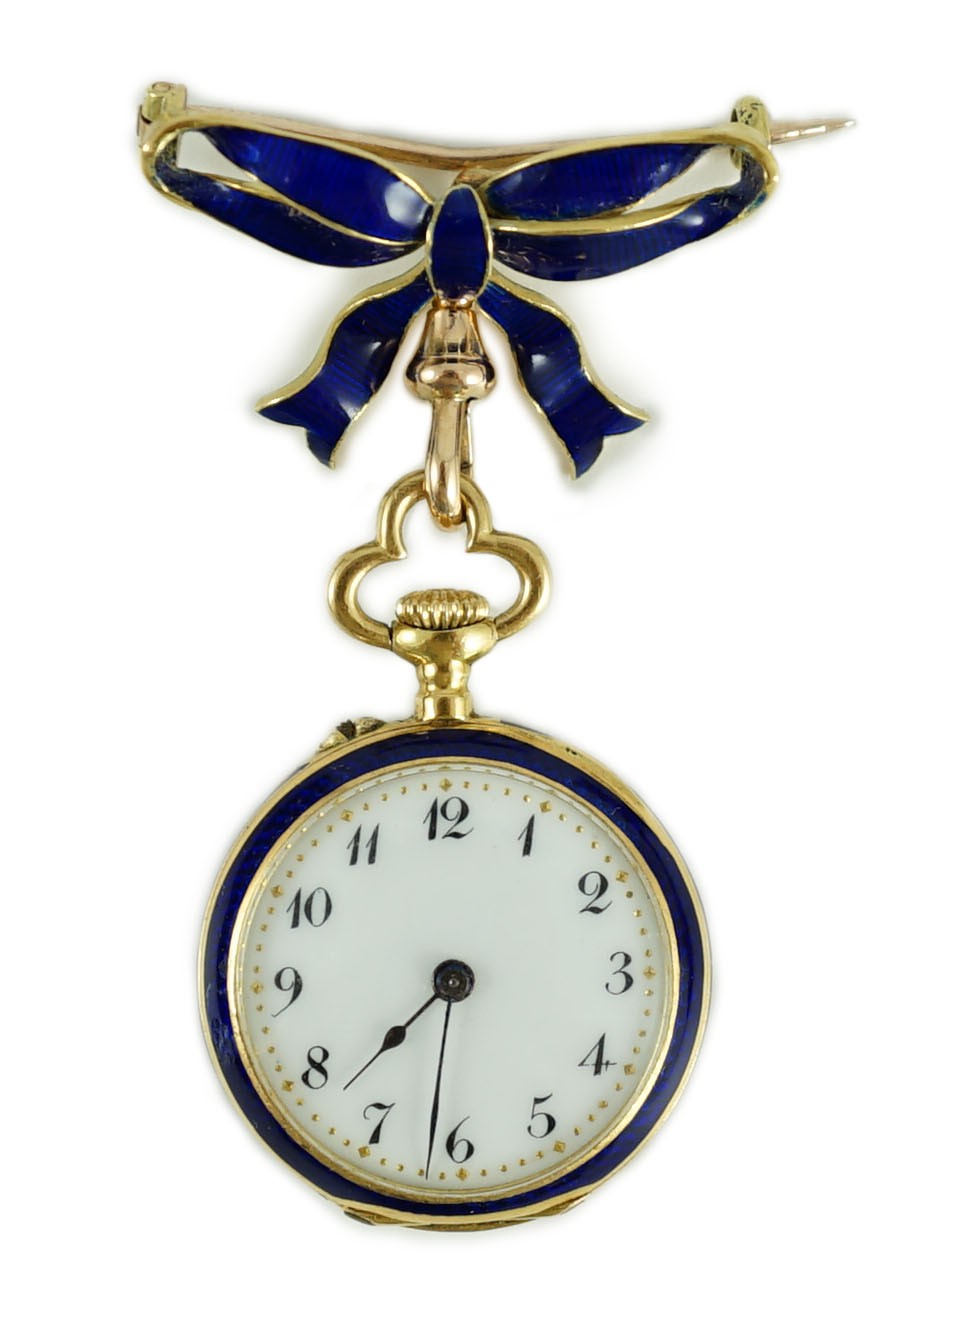 An early 20th century continental gold, diamond chip and blue enamel set open faced fob watch, on a gold and blue enamel set suspension bow brooch